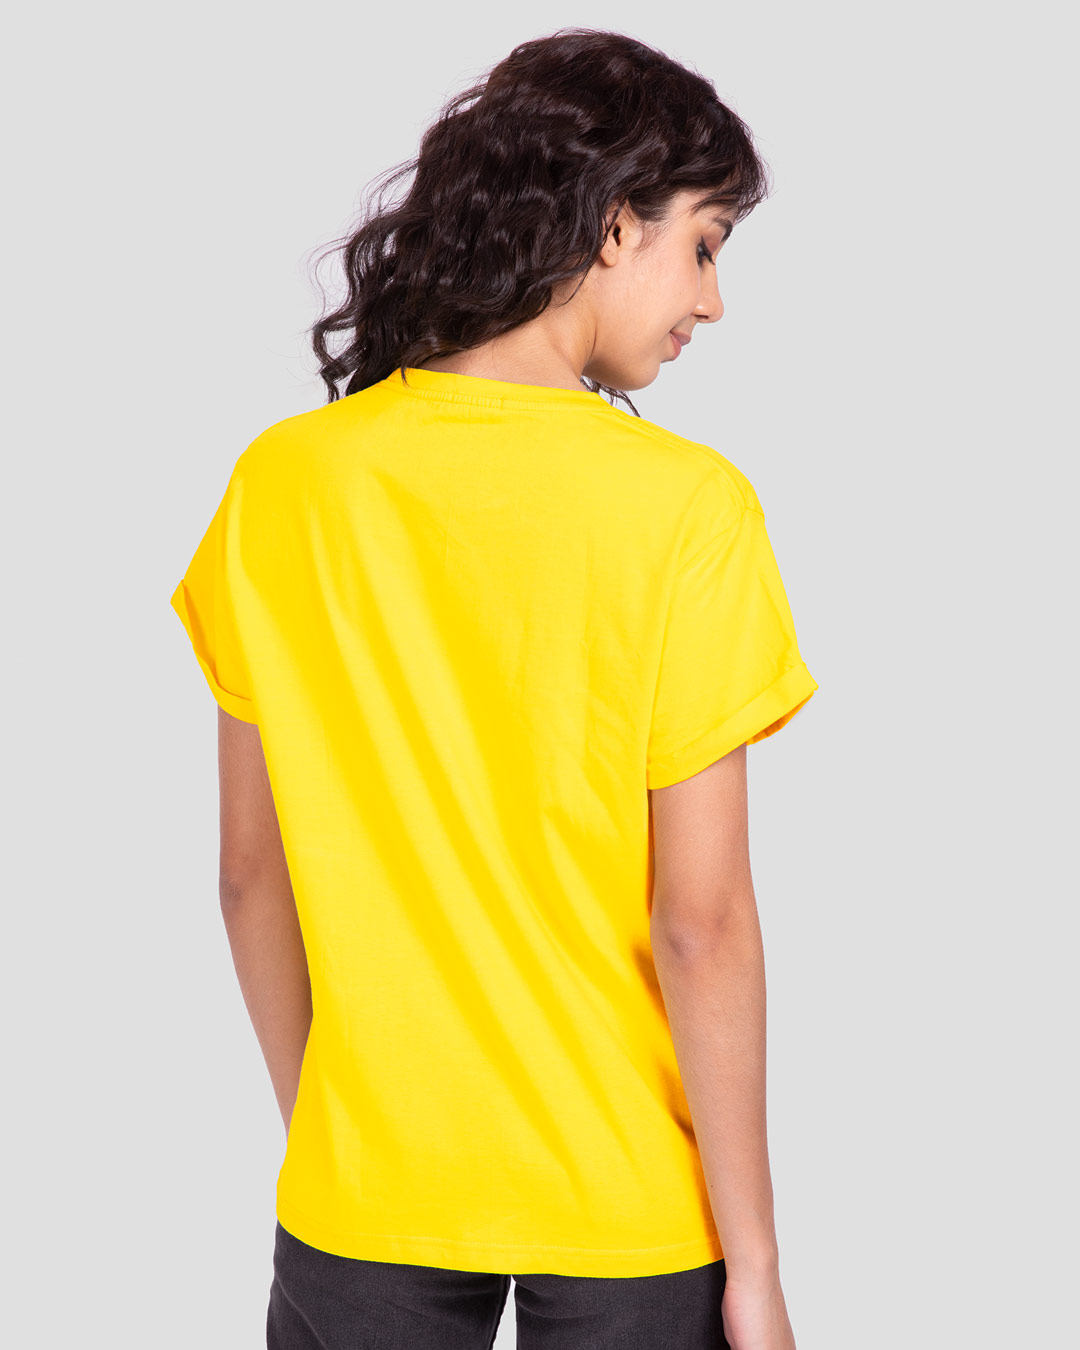 Shop All We Have Boyfriend T-Shirt Pineapple Yellow-Back